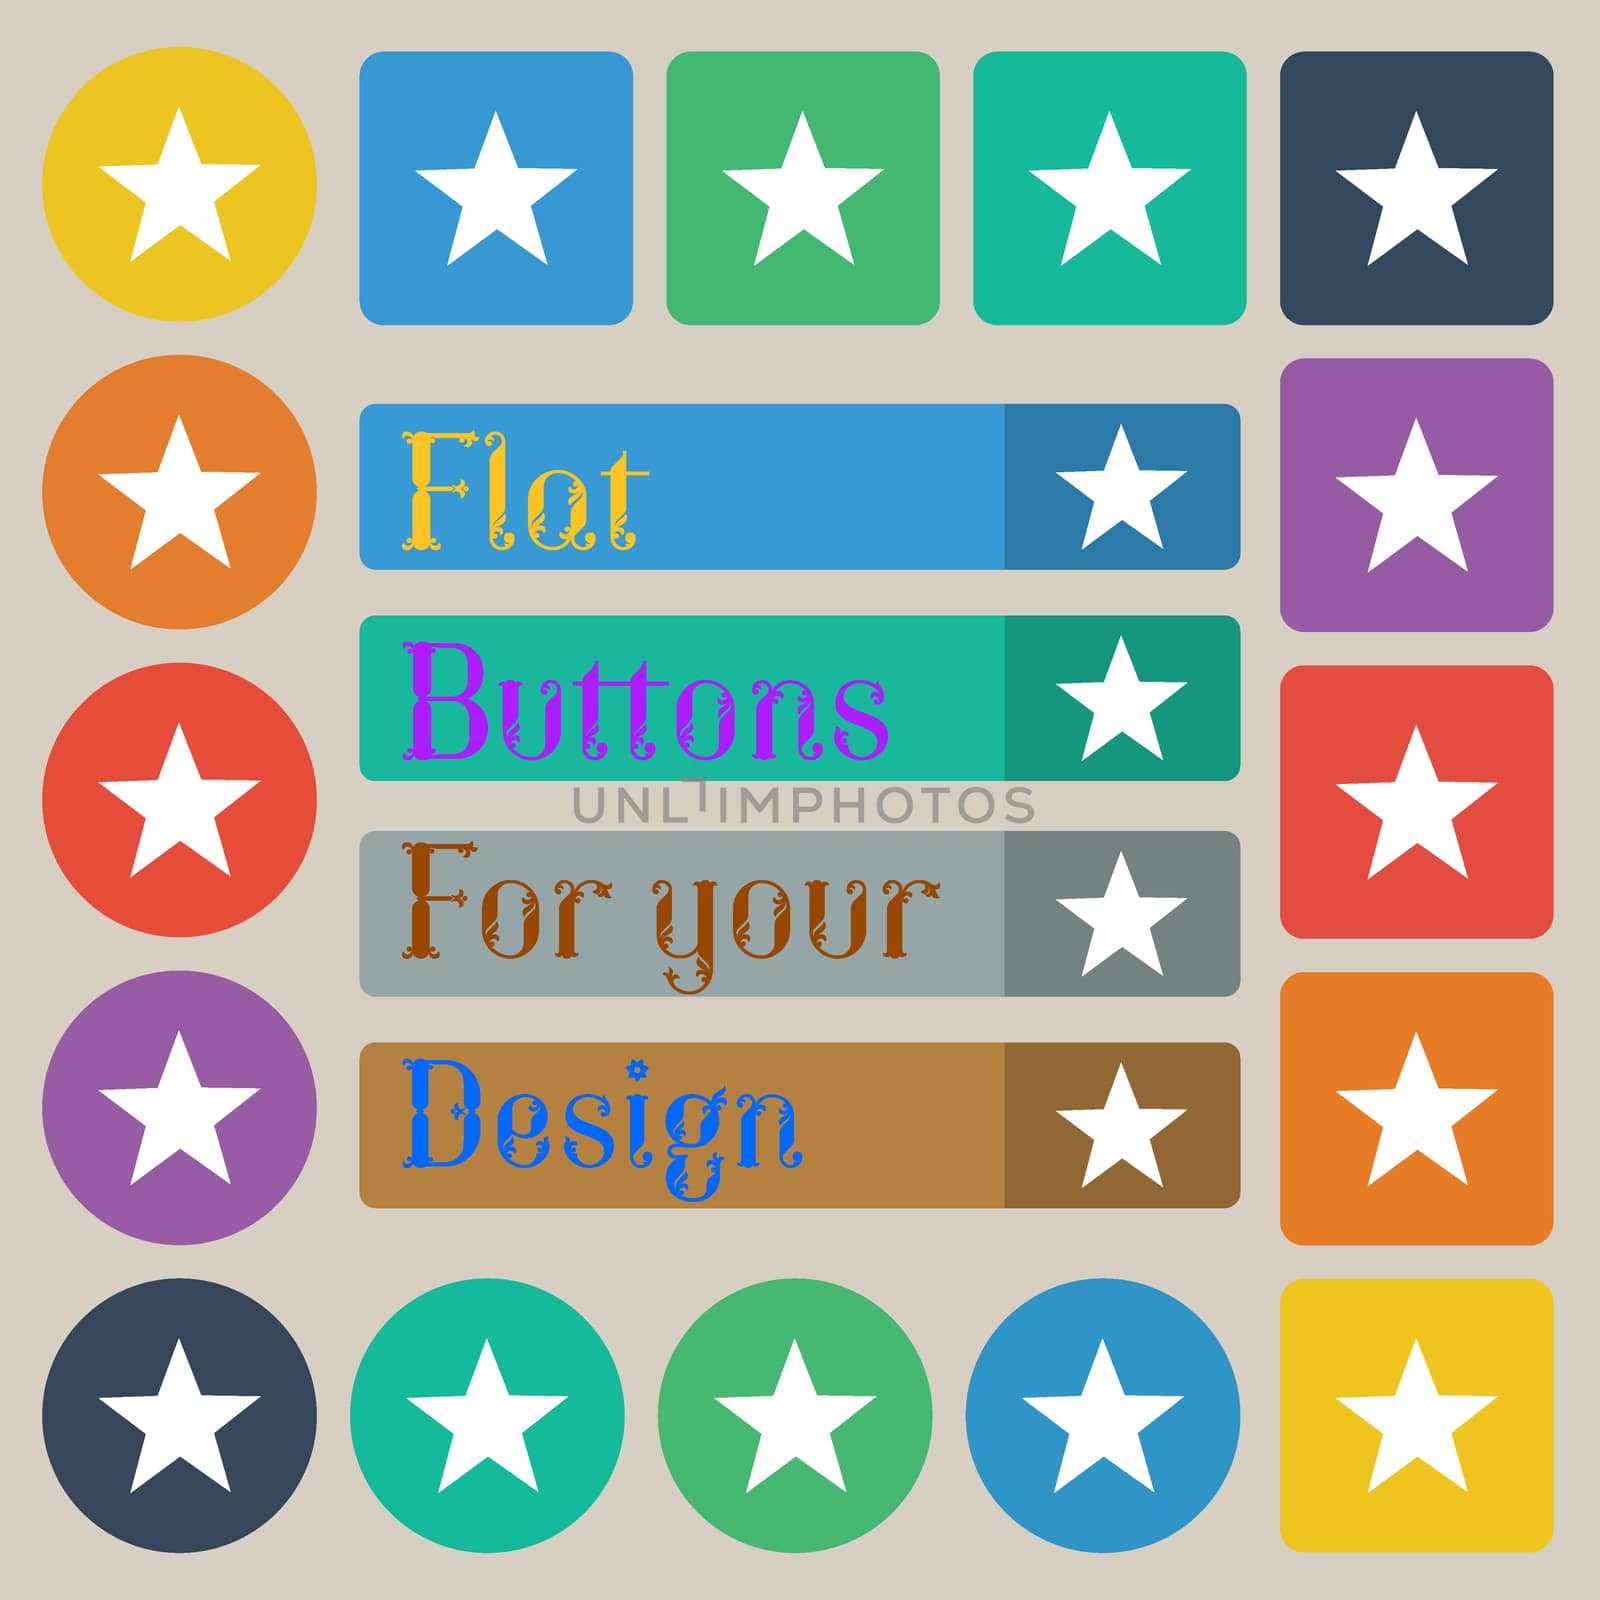 Star sign icon. Favorite button. Navigation symbol. Set of twenty colored flat, round, square and rectangular buttons. illustration